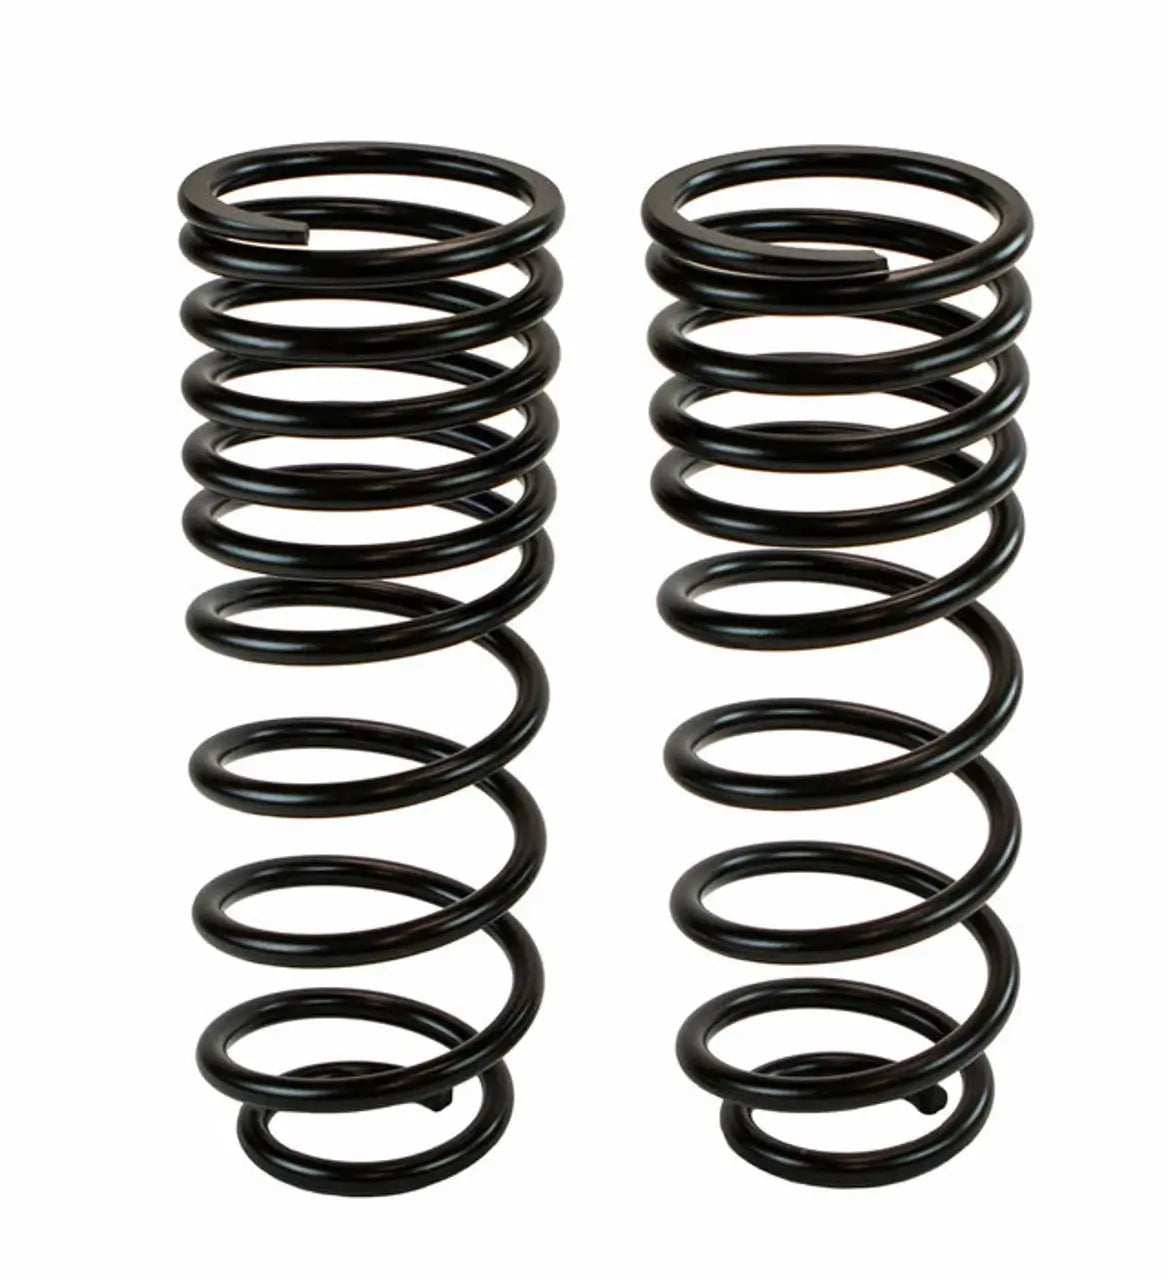 Toyota MCO 75MM Front Coil Springs (Heavy Duty) Land Cruiser 80 Series